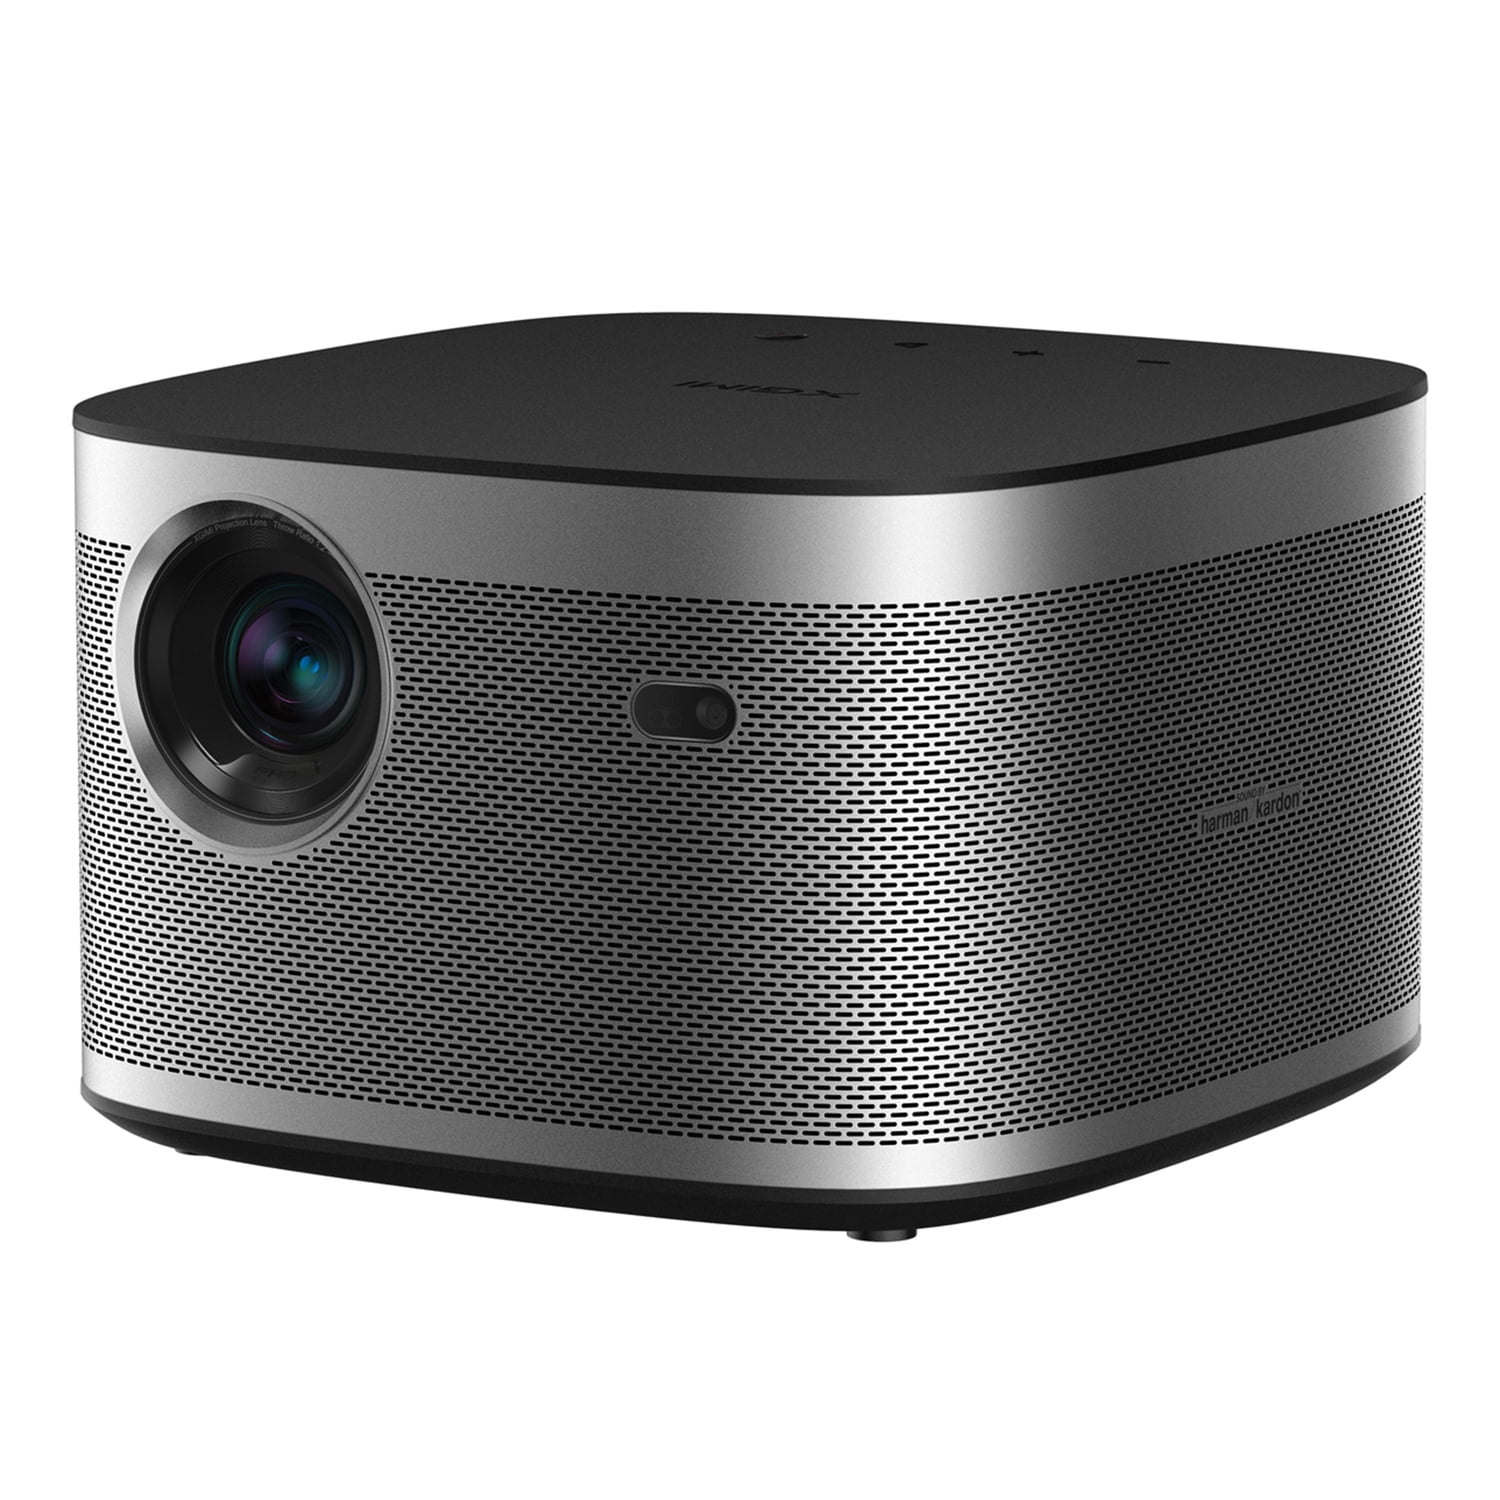 XGIMI Halo+ Portable Projector Review: A Home Theater You Can Take With You